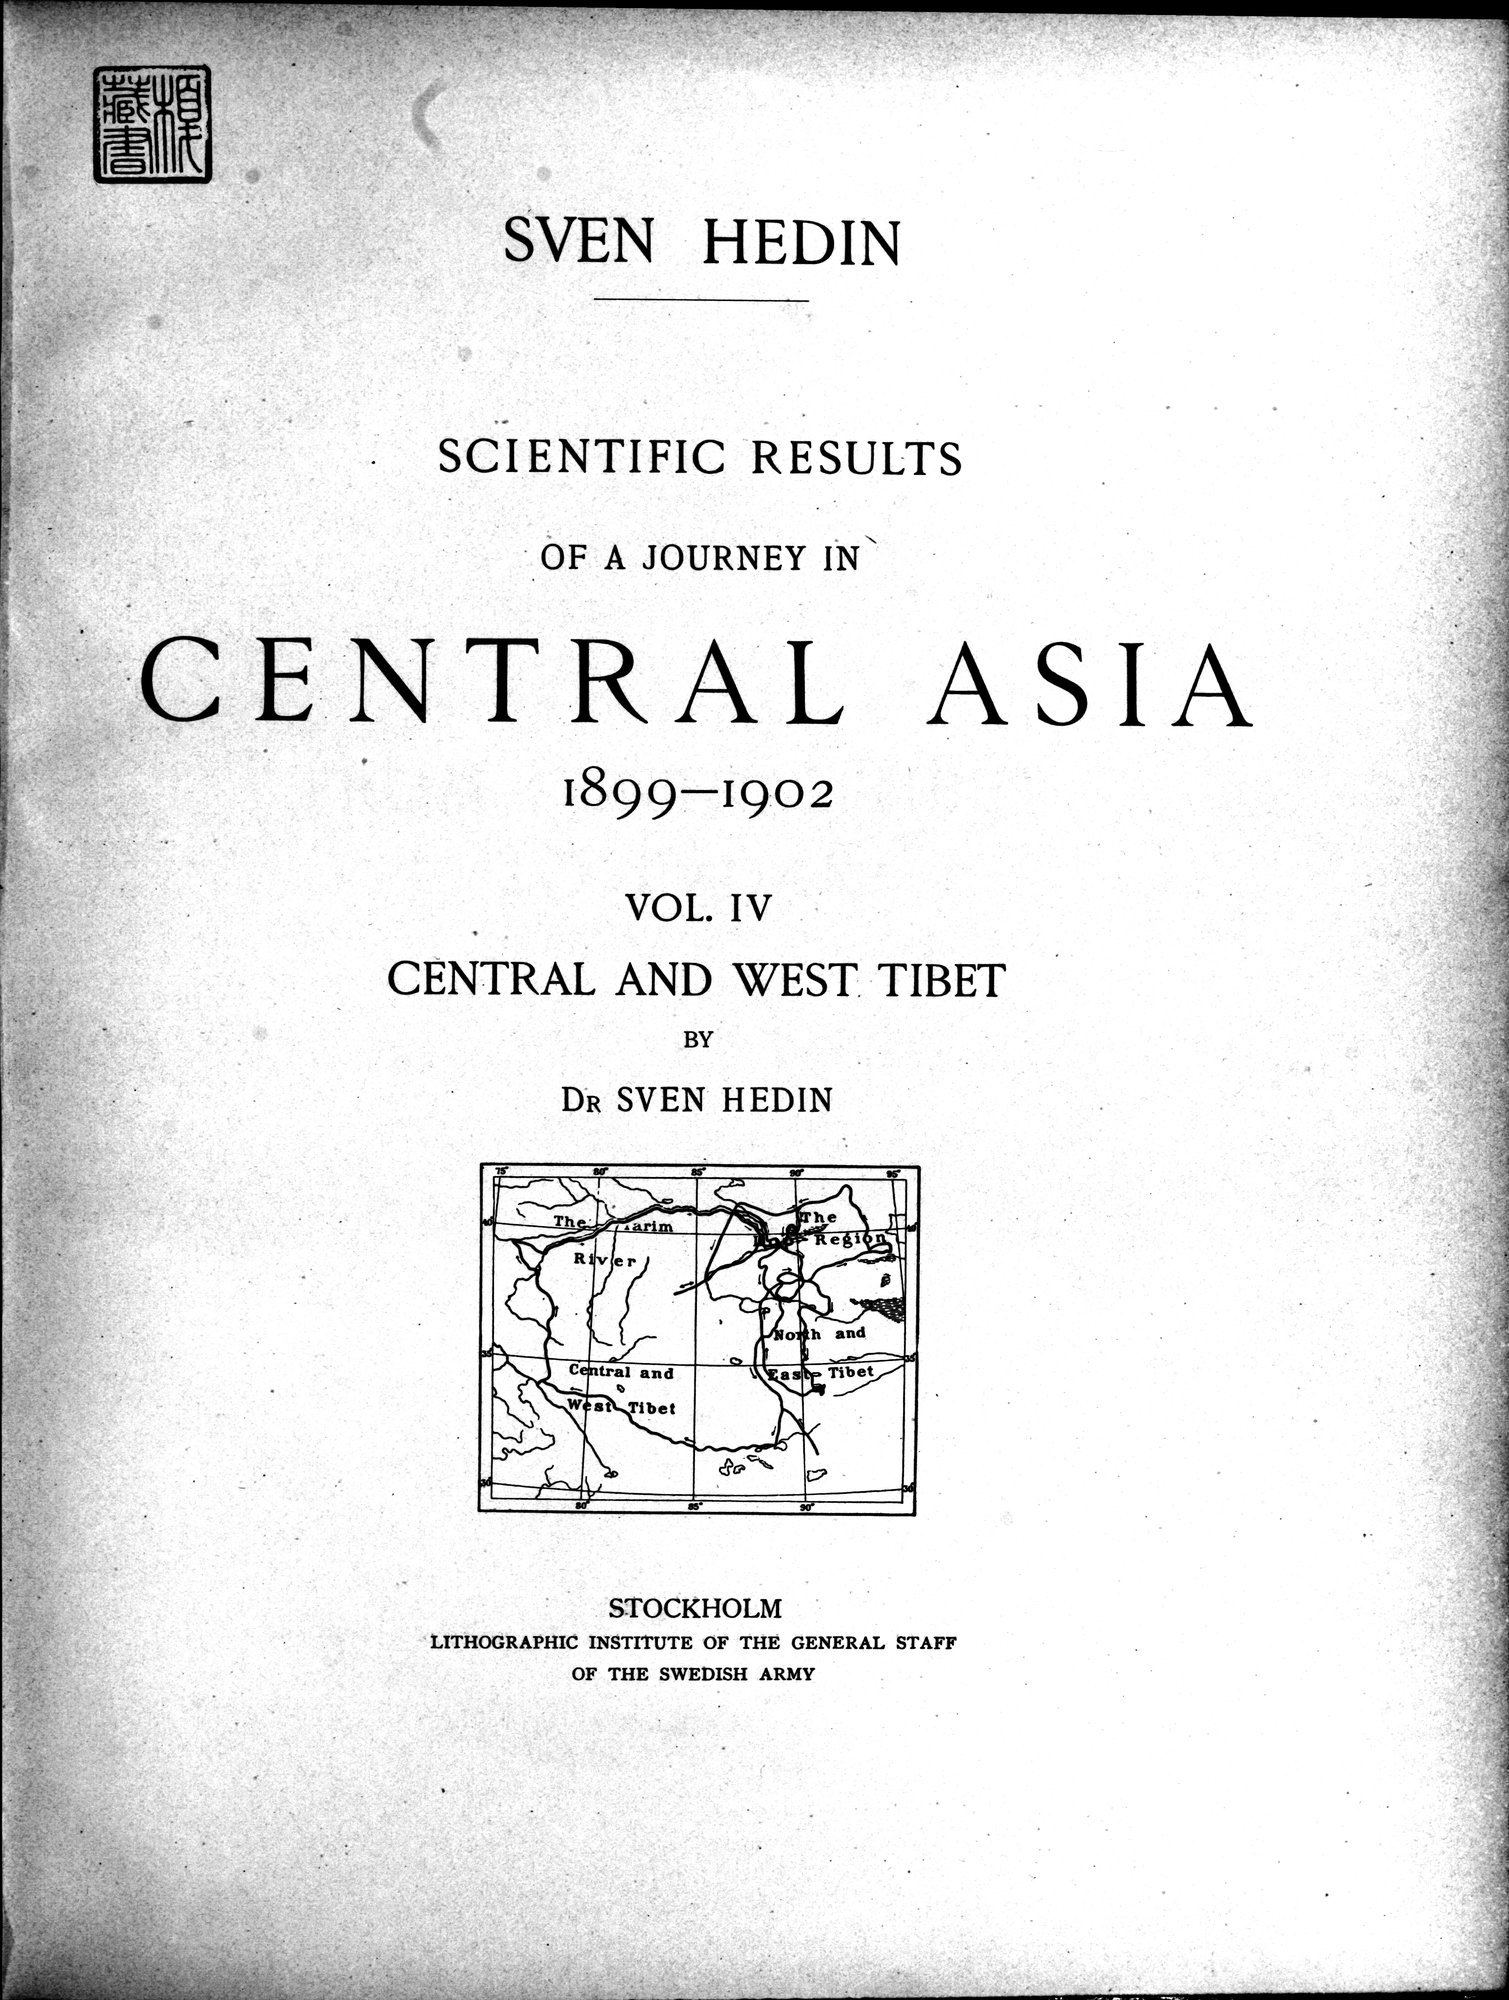 Scientific Results of a Journey in Central Asia, 1899-1902 : vol.4 / Page 9 (Grayscale High Resolution Image)